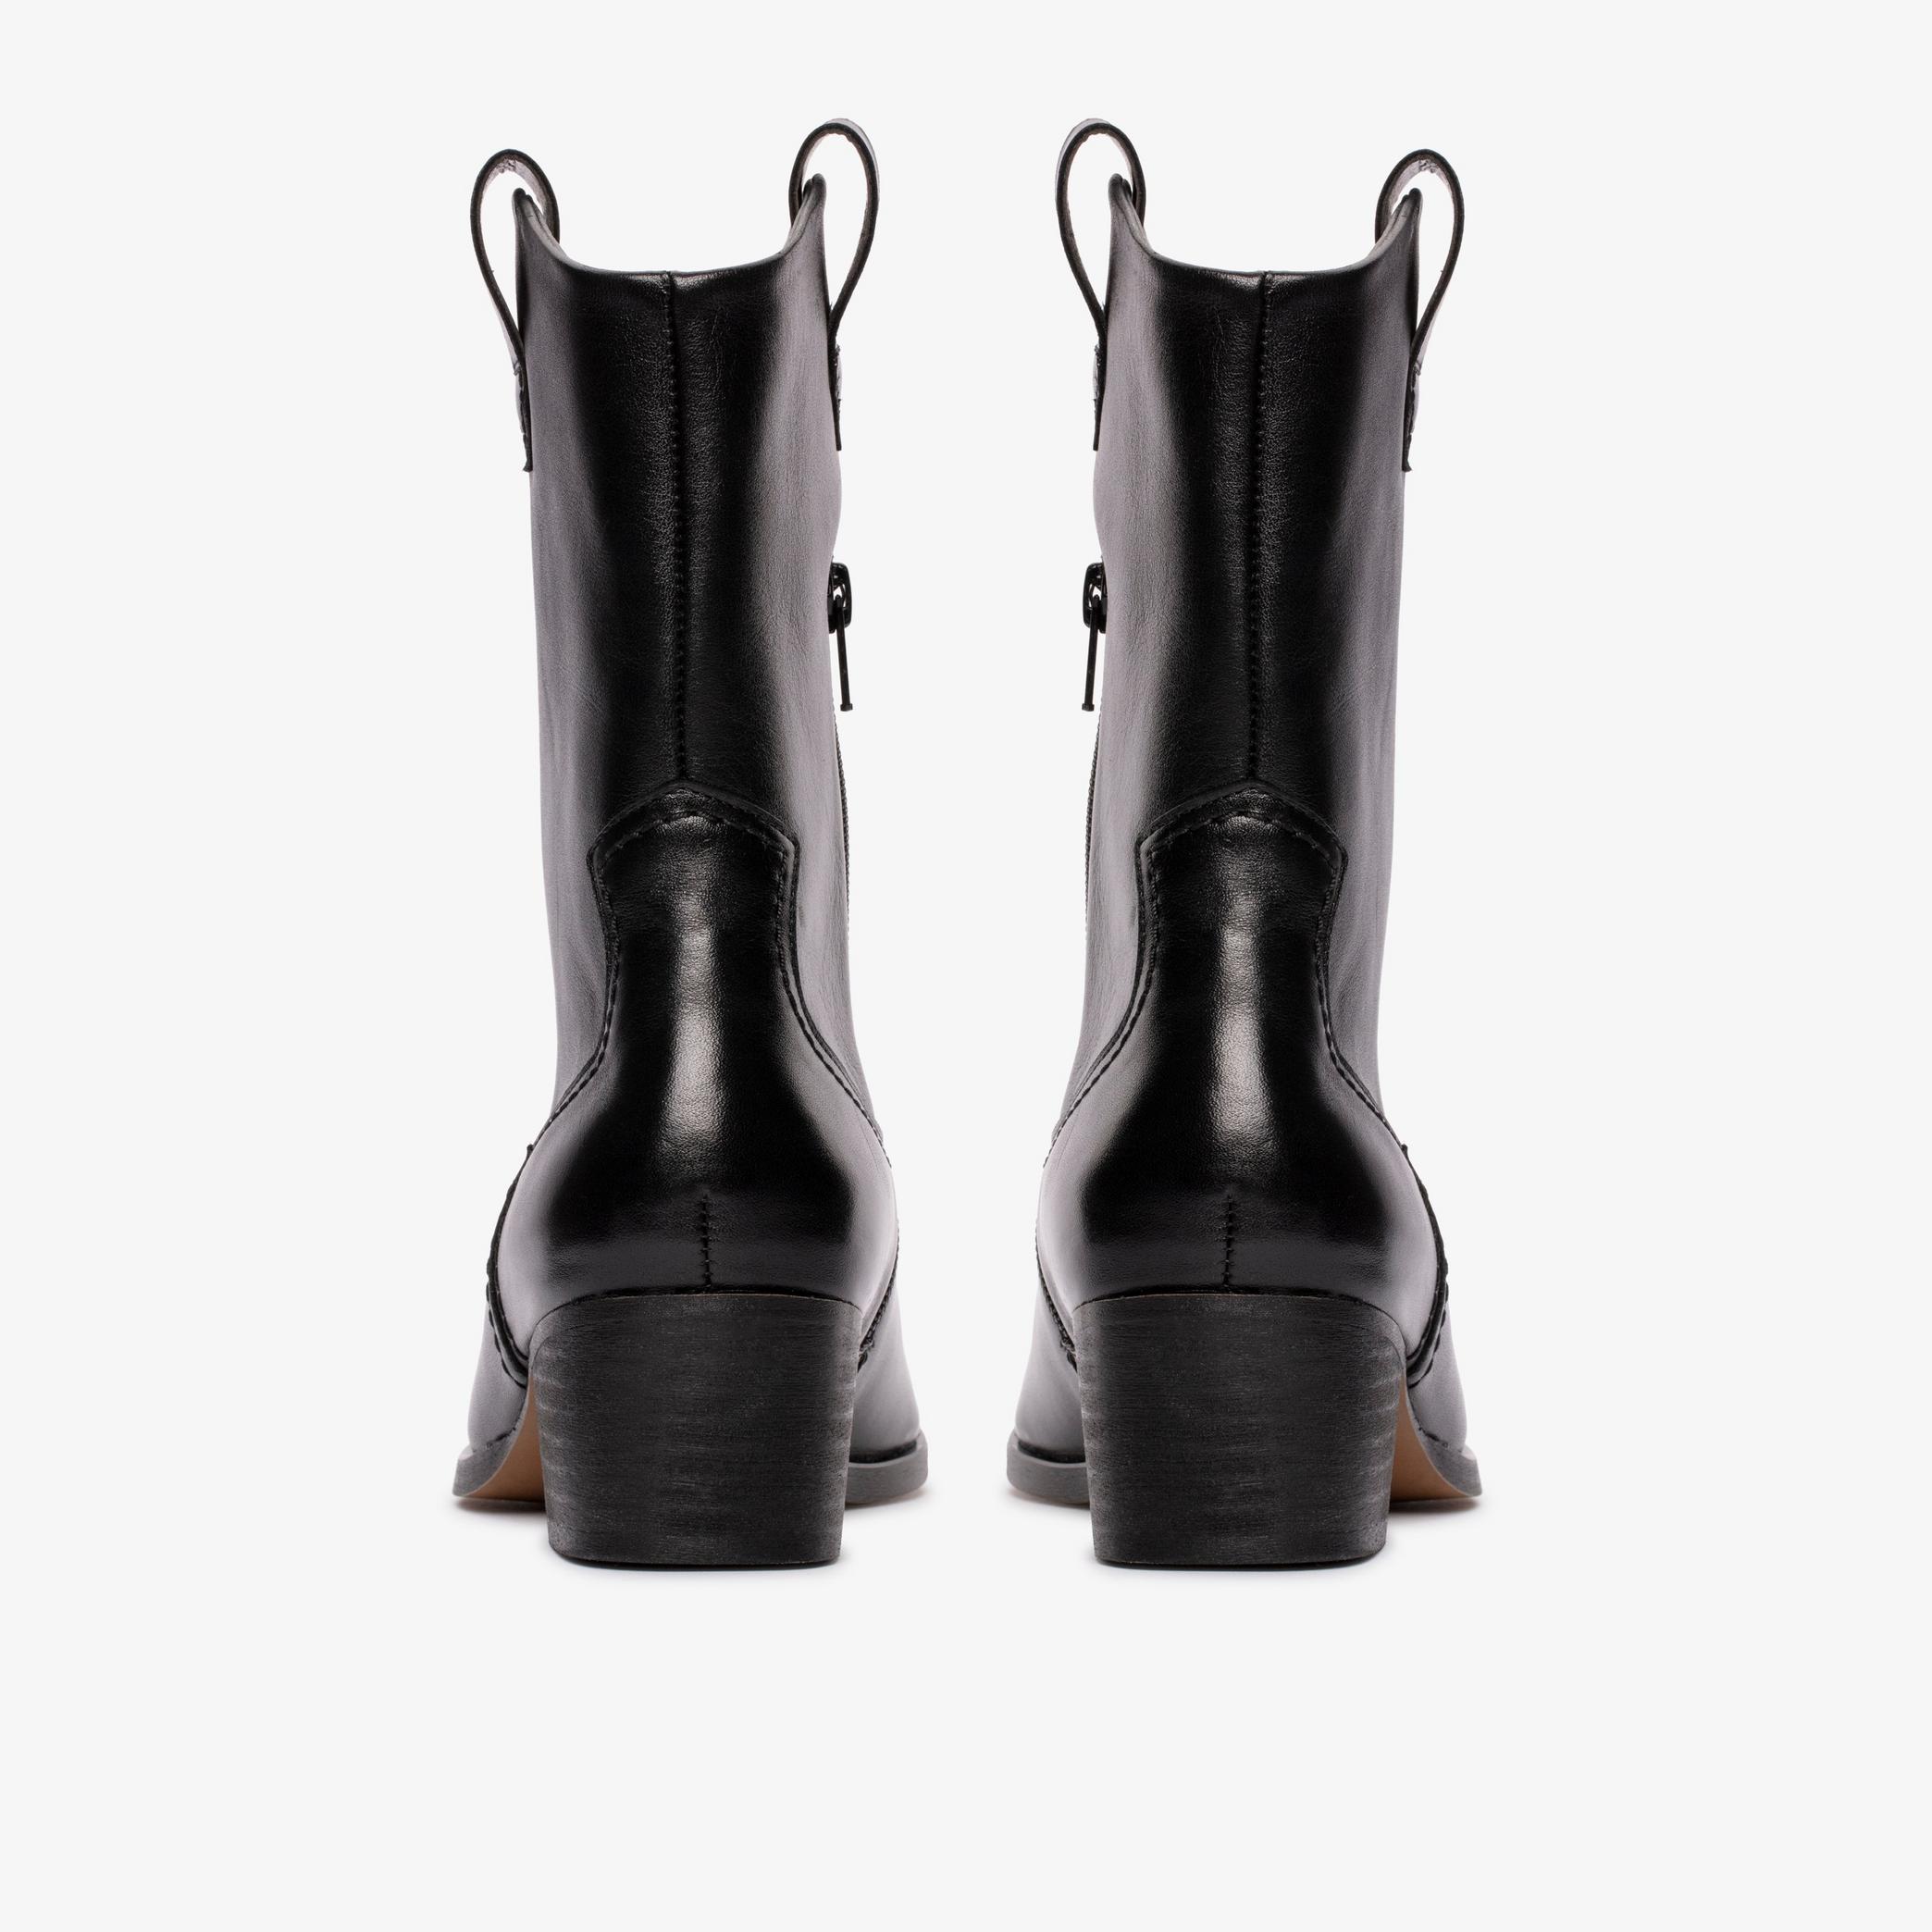 Octavia Up Black Leather Mid Calf Boots, view 5 of 6